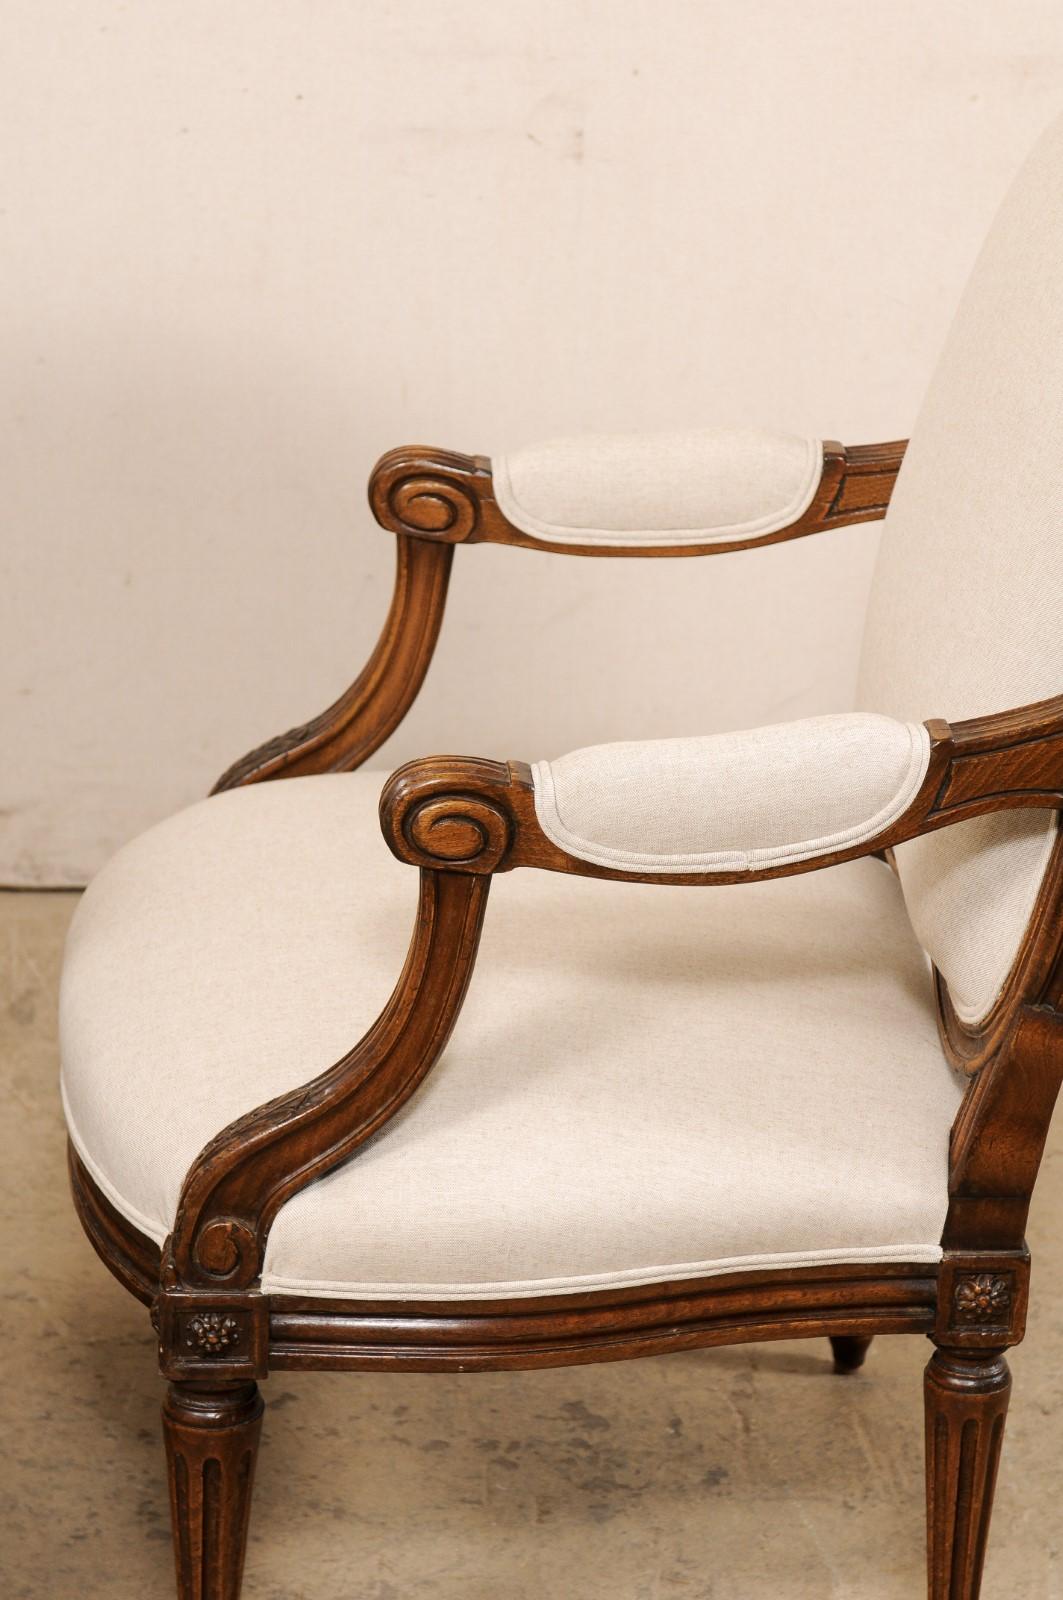 19th C. French Pair Carved-Wood Fauteuil Armchairs, Newly Upholstered in Linen For Sale 6